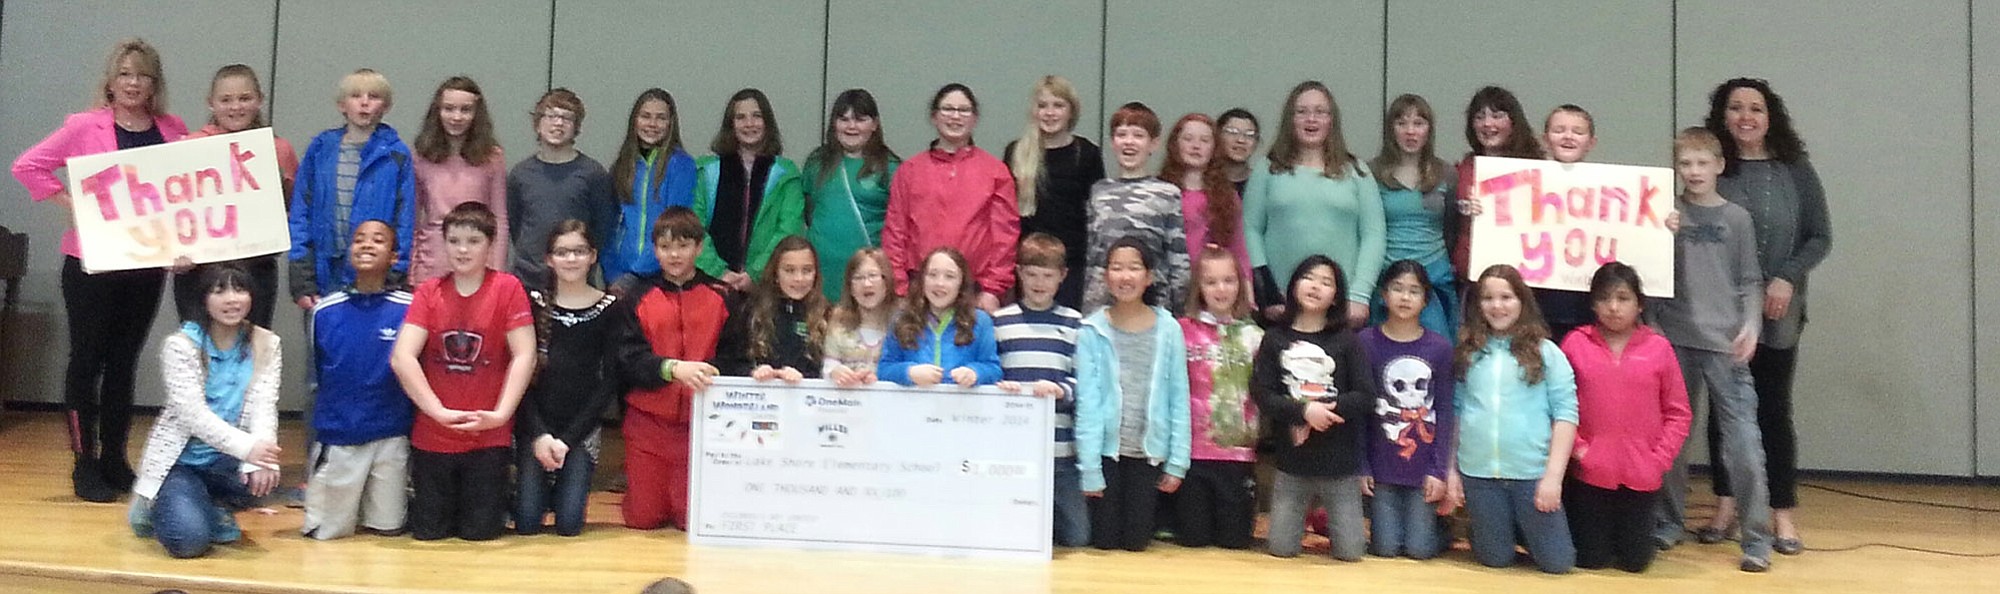 West Vancouver: Erin Stromme's fifth-grade class earned a $1,000 award to enhance the resources of Lake Shore Elementary School's art department by winning the 22nd annual Winter Wonderland Children's Art Contest.